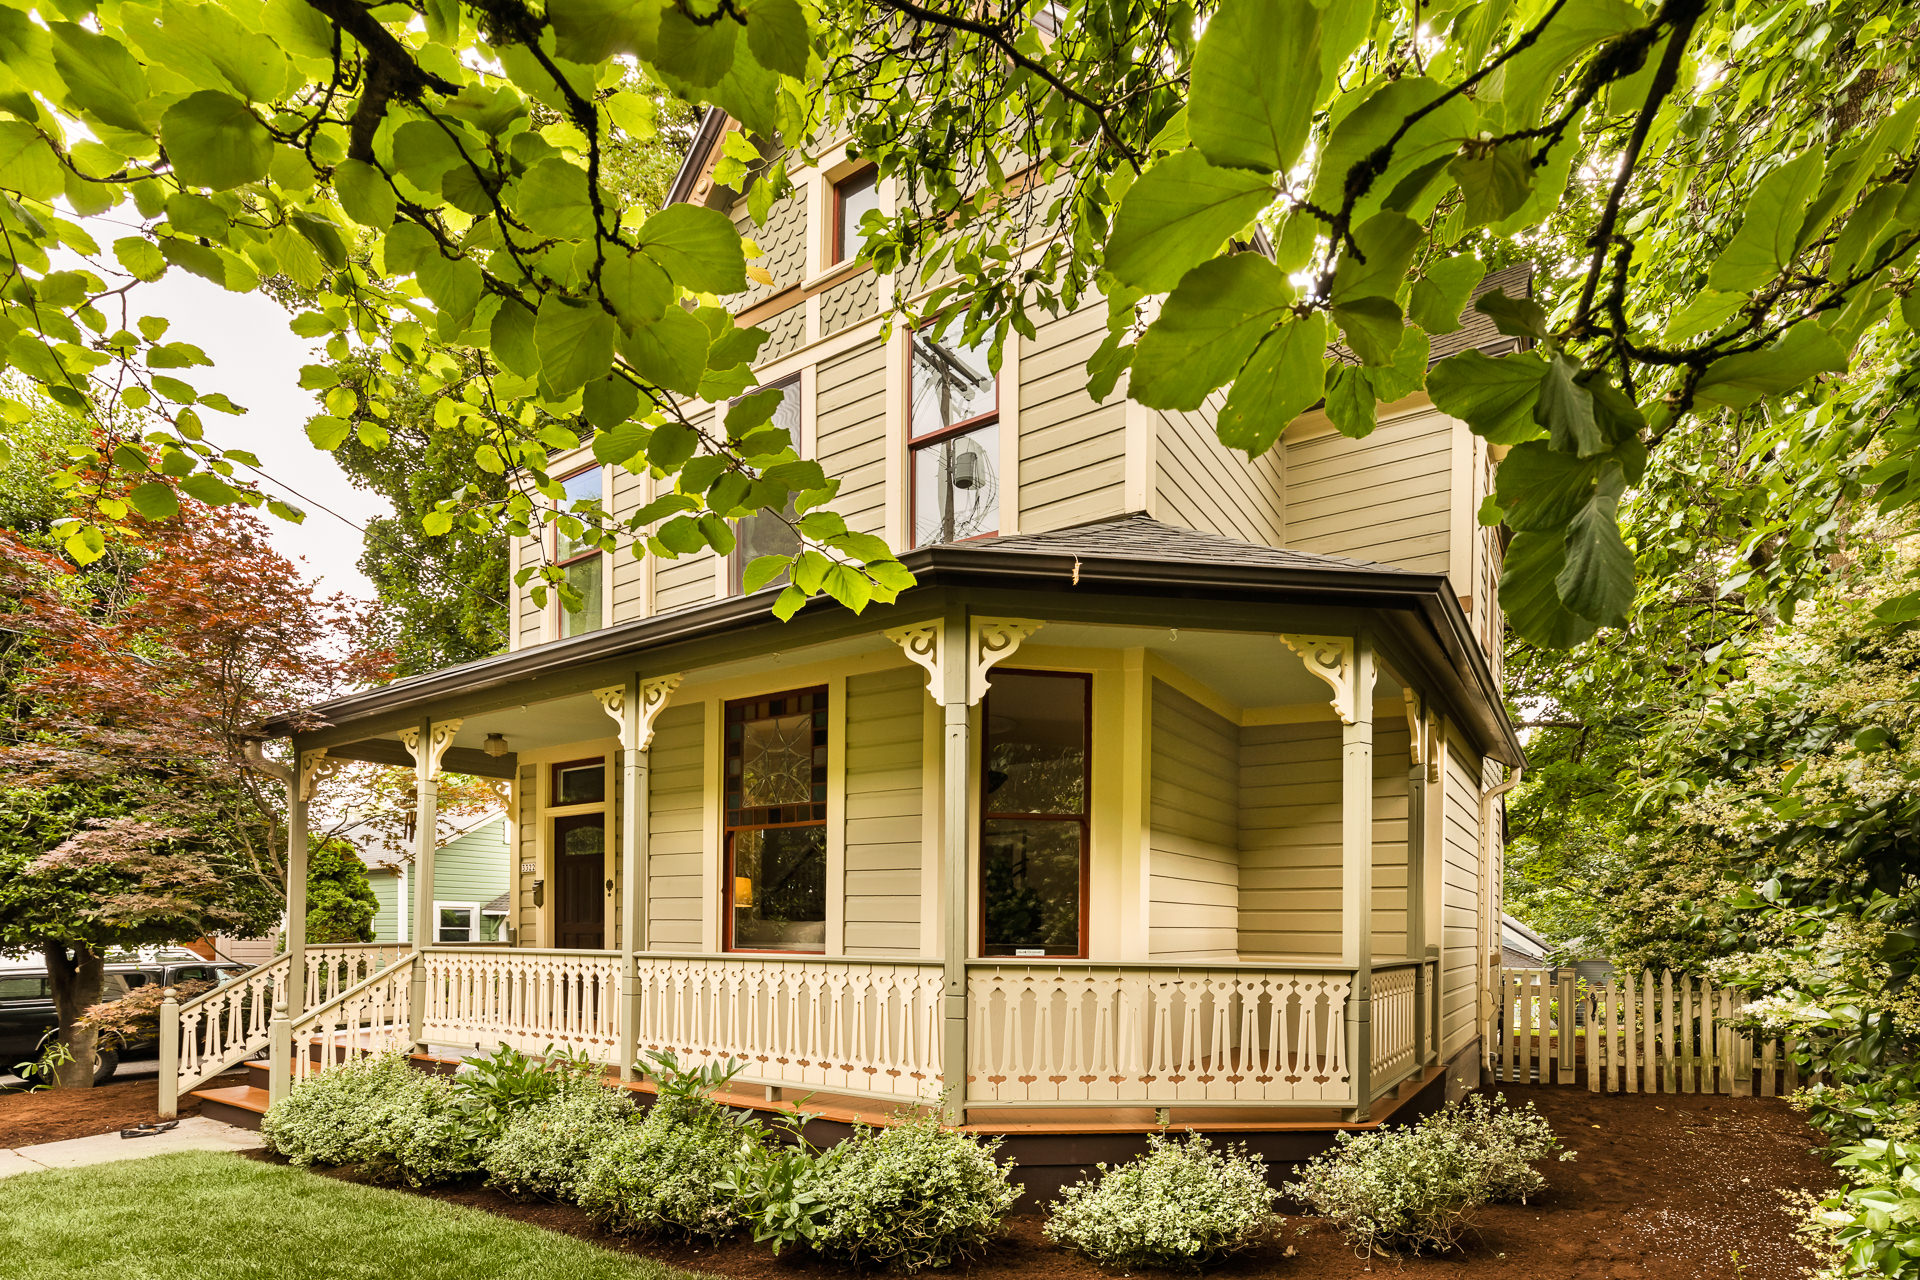 Sold! Beautiful Historic Victorian in Lair Hill